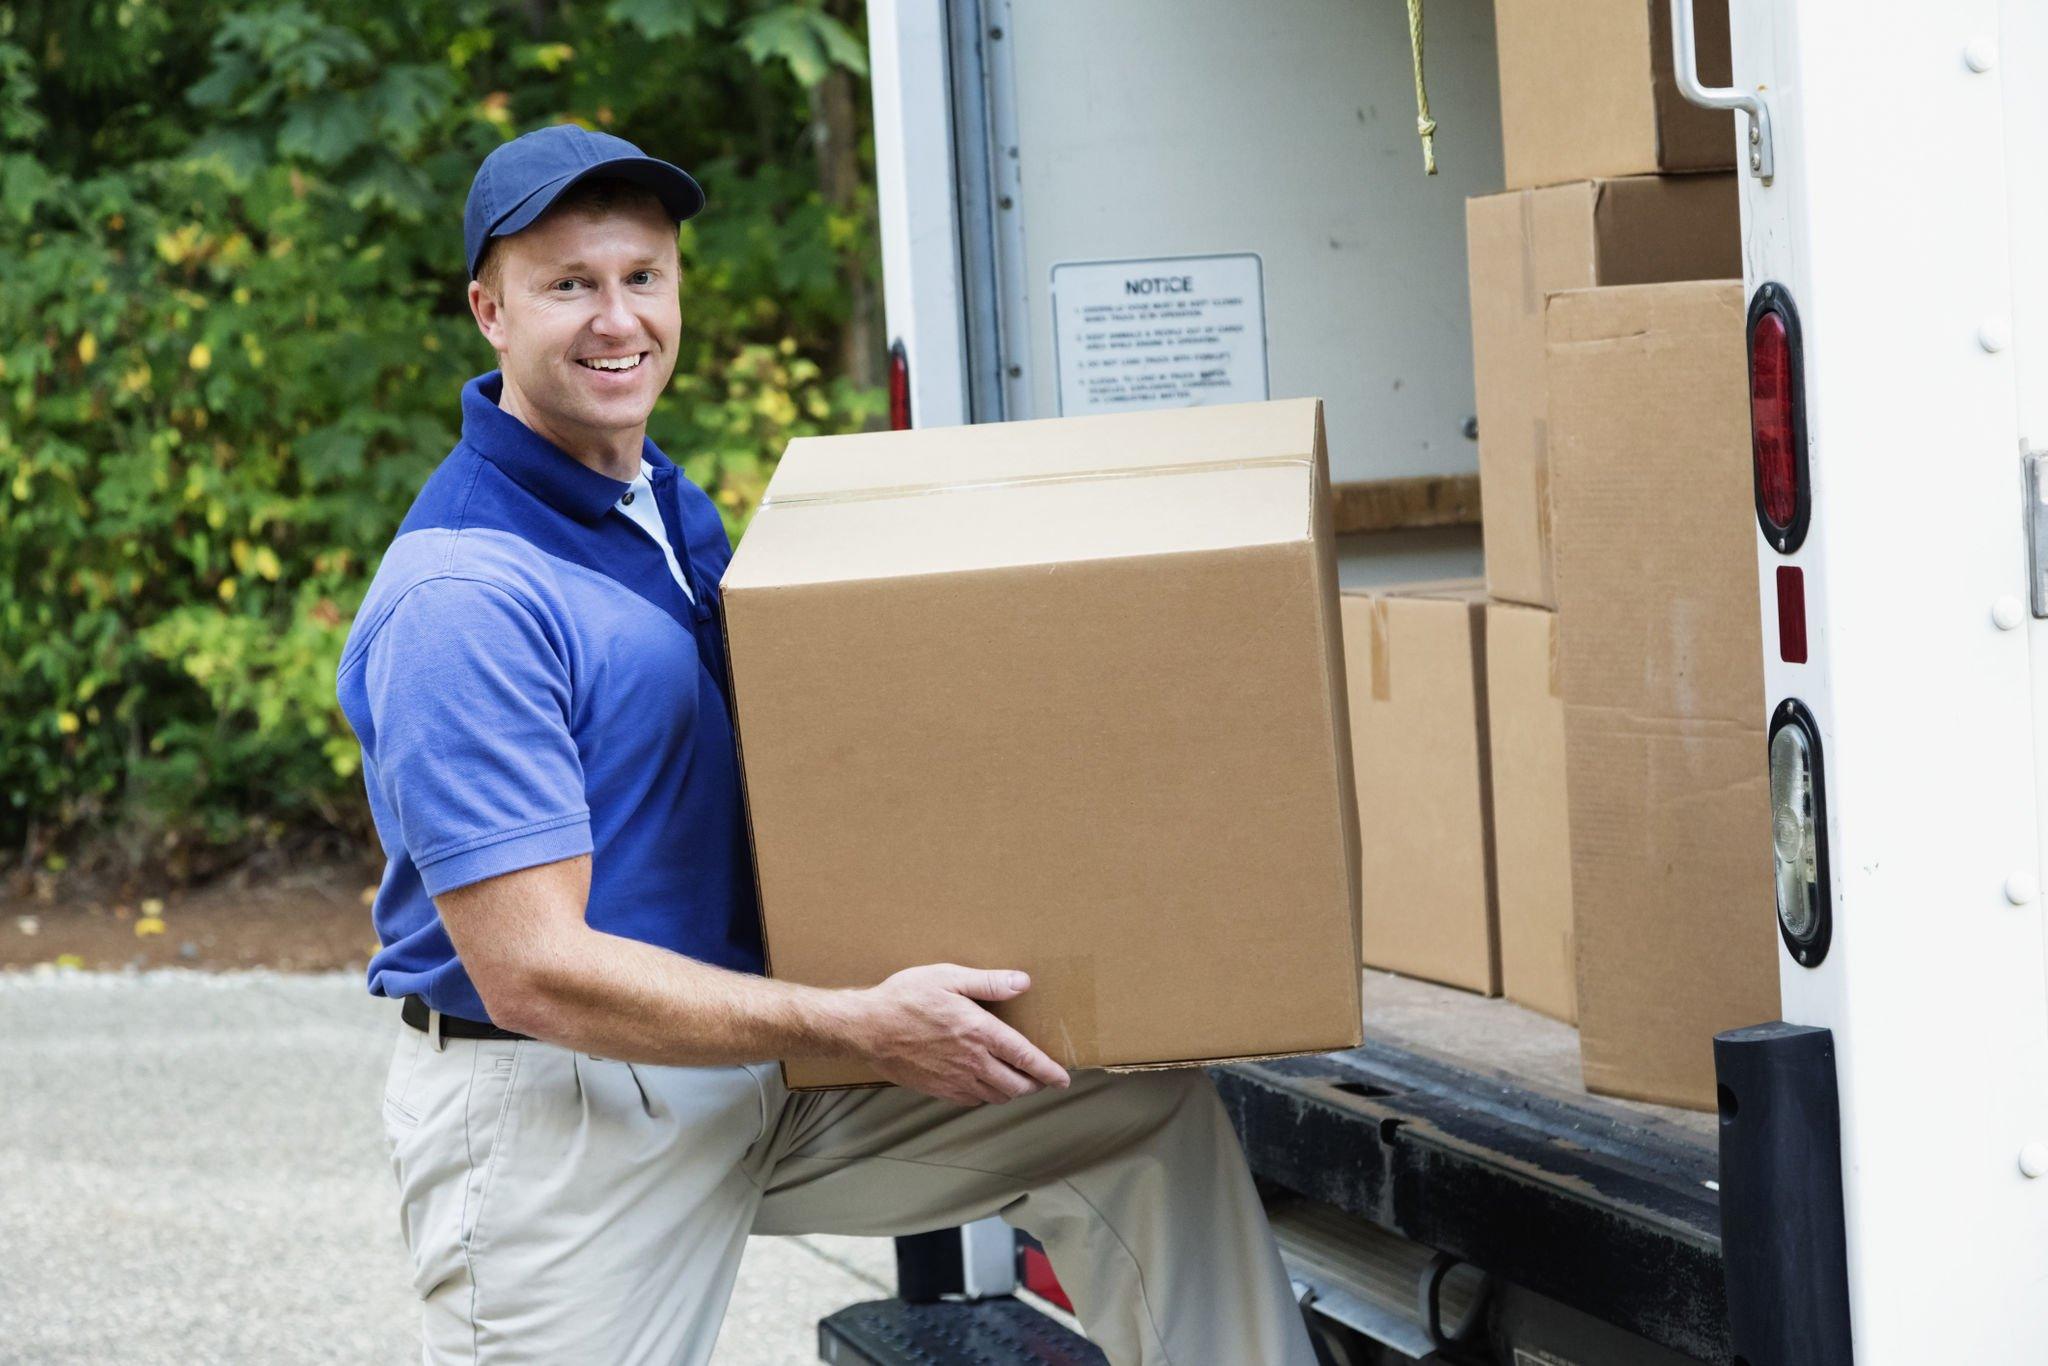 All that You May Expect from Any Professional Moving Company